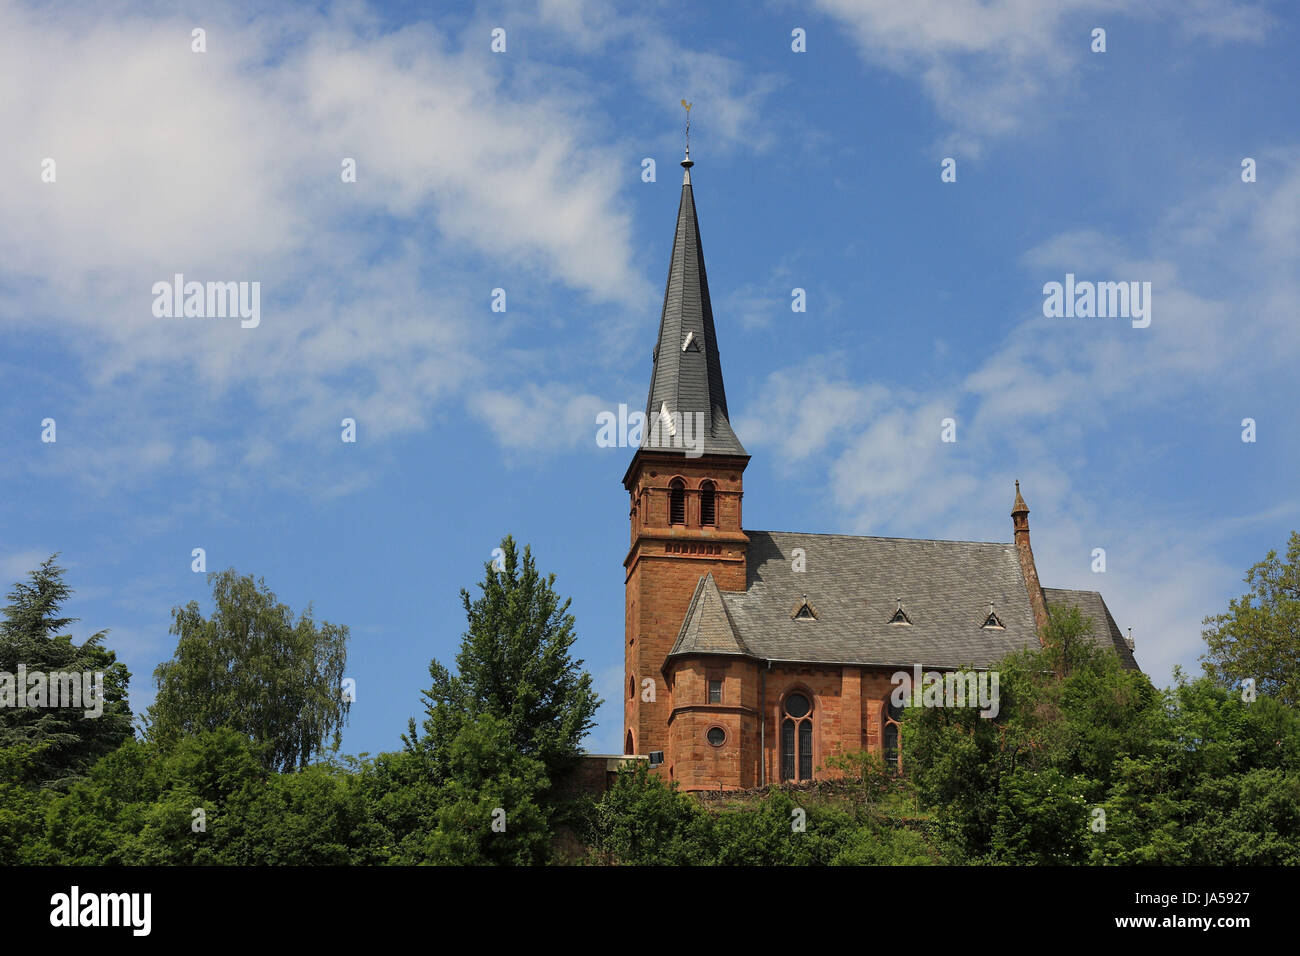 church, style of construction, architecture, architectural style, parish Stock Photo